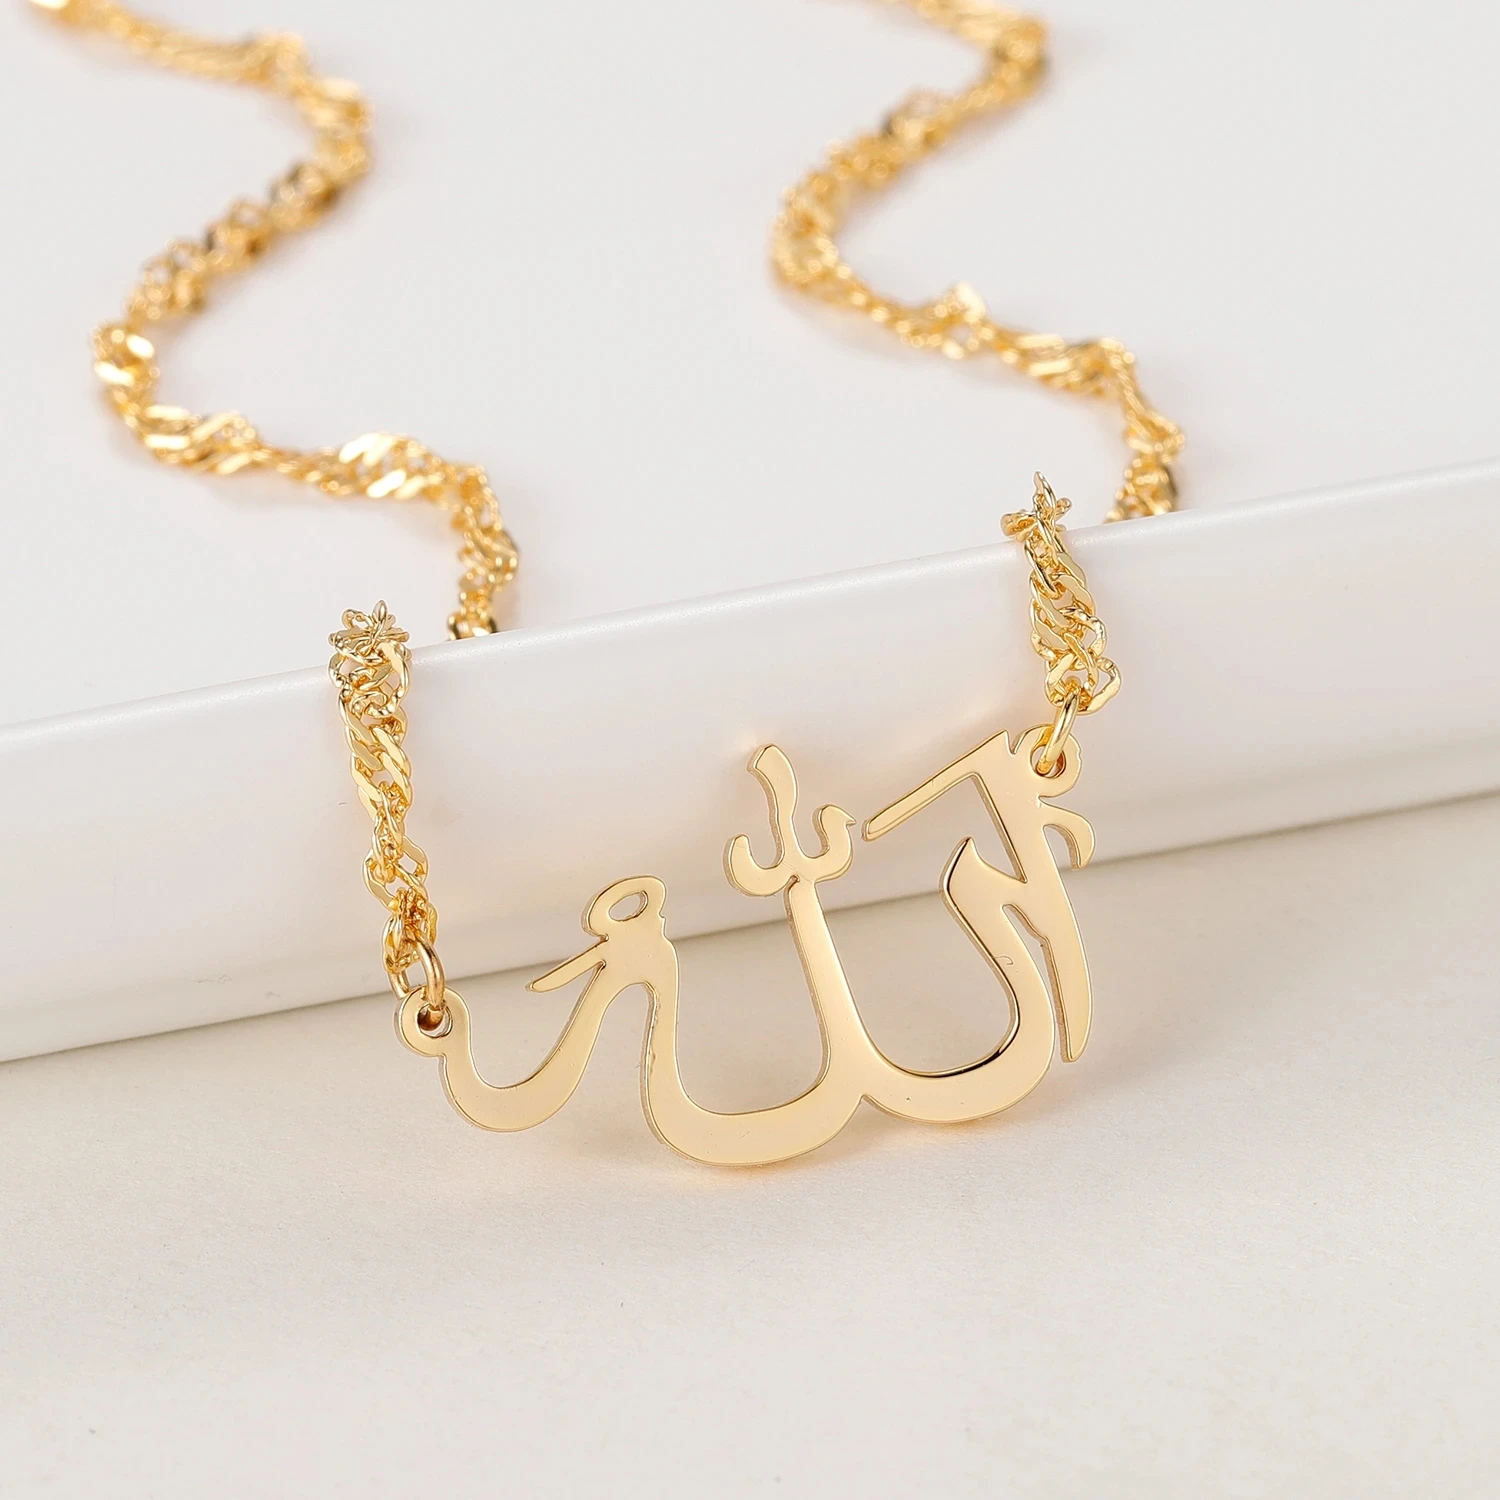 Custom Name Arabic Calligraphy Necklace Stainless Steel Pendants Islam Muslim Religious Jewelry For Women Mother's Day Gifts